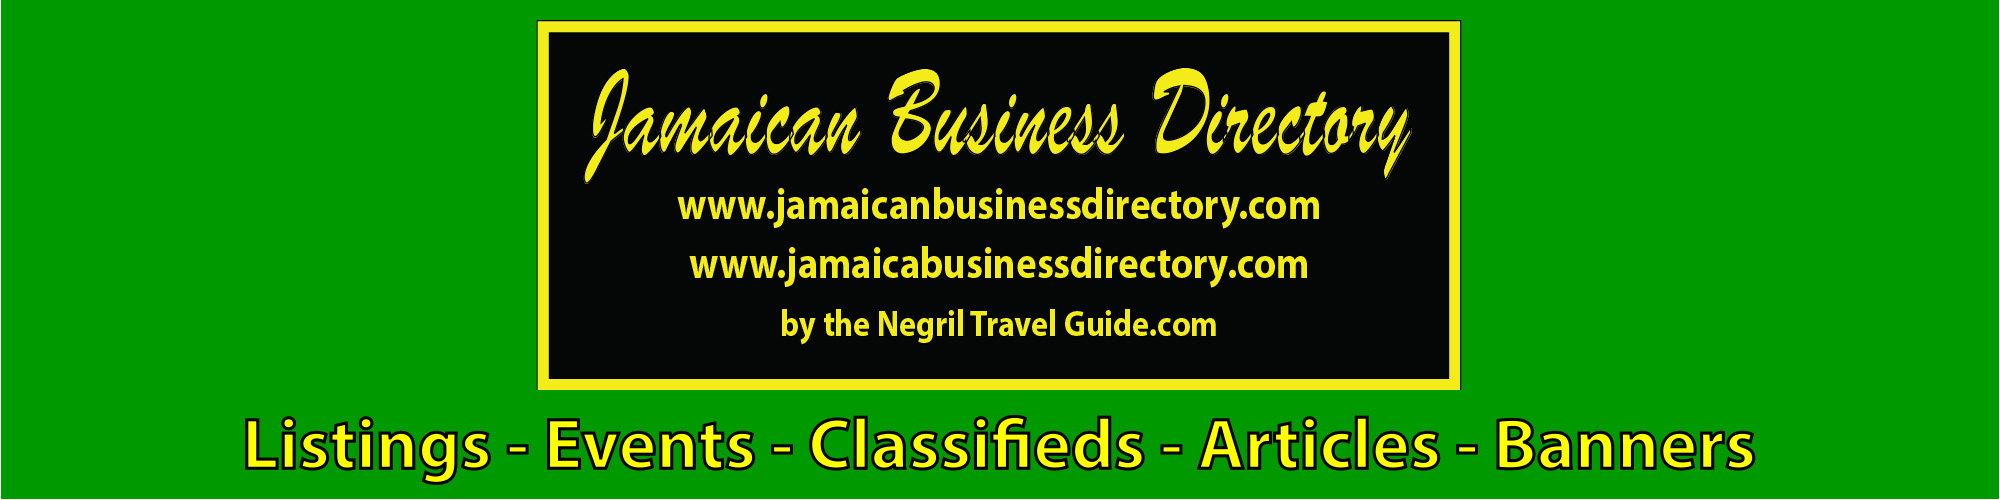 Jamaican Business Directory - www.jamaicanbusinessdirectory.com - www.jamaicabusinessdirectory.com